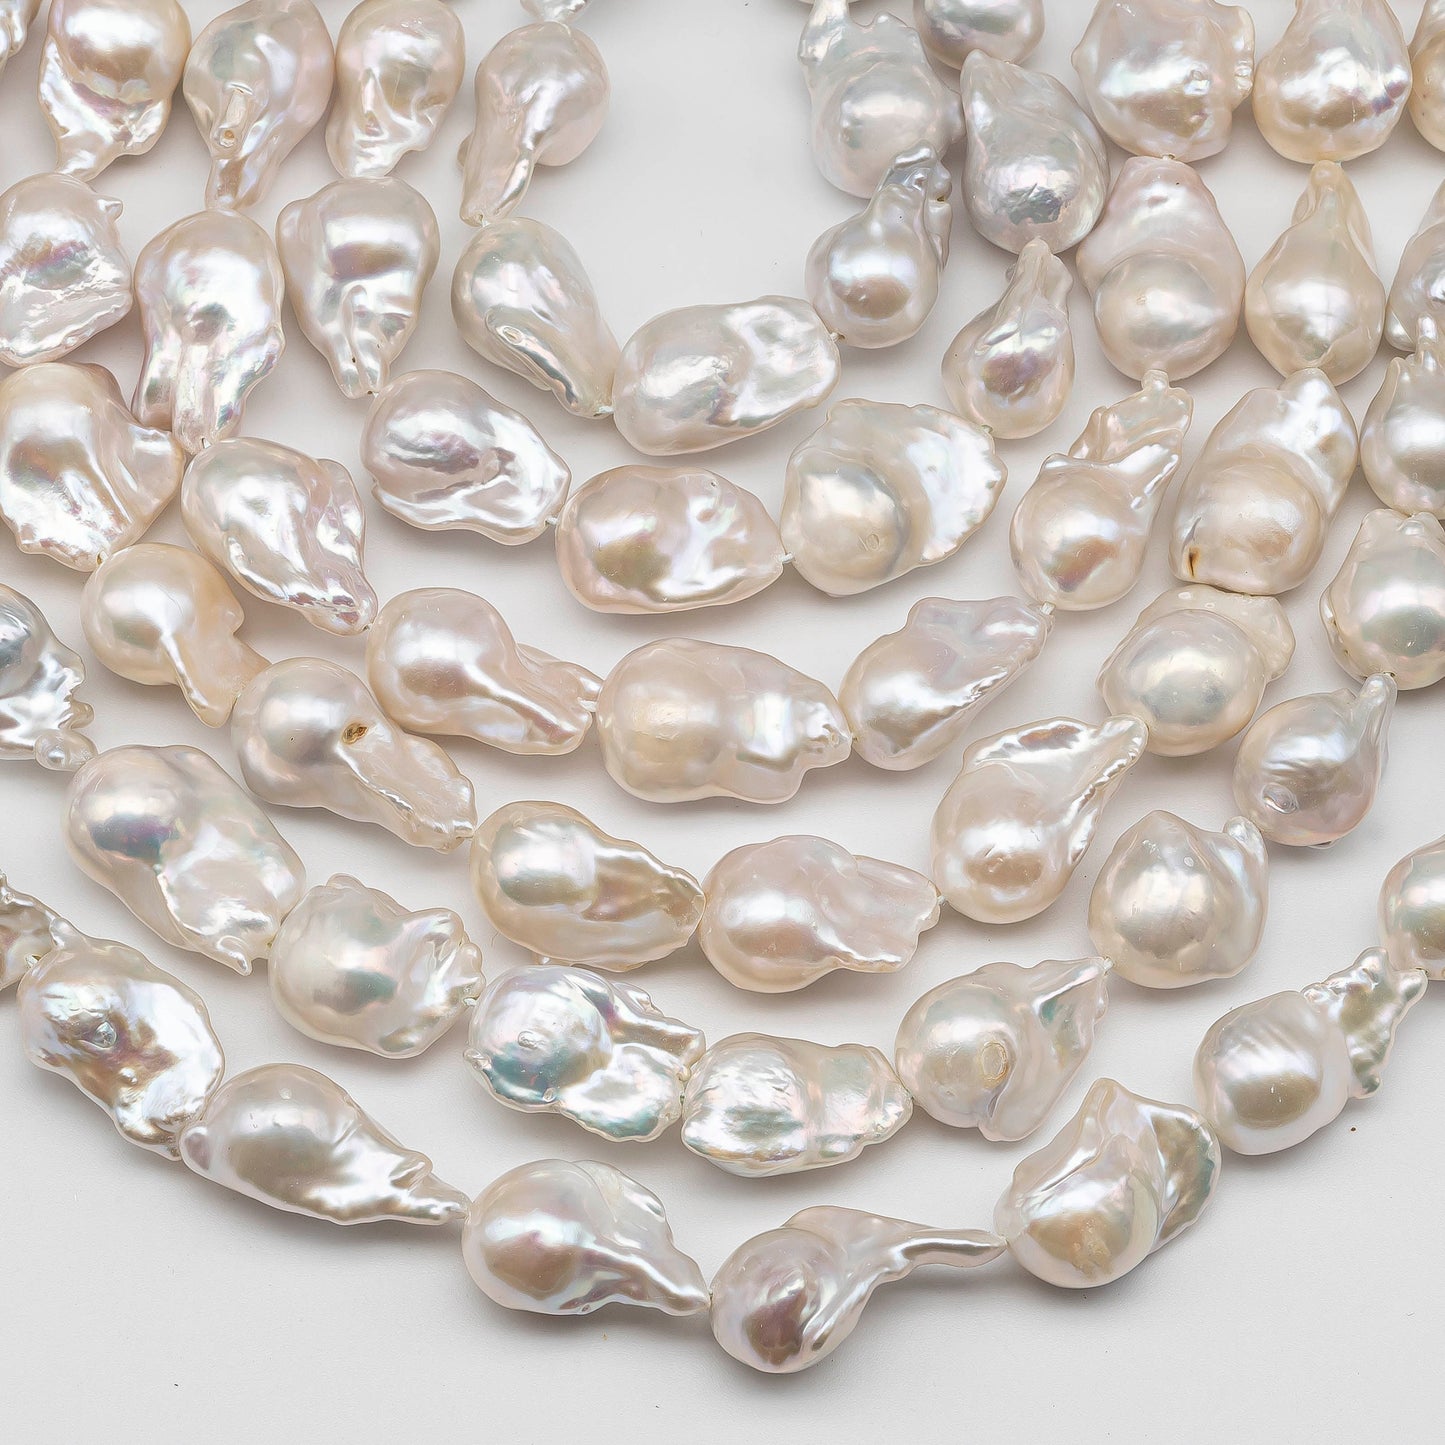 12-16mm Fireball Baroque Pearl with Smooth Surface and Beautiful Luster in Full Strand White Color, SKU # 1427BA